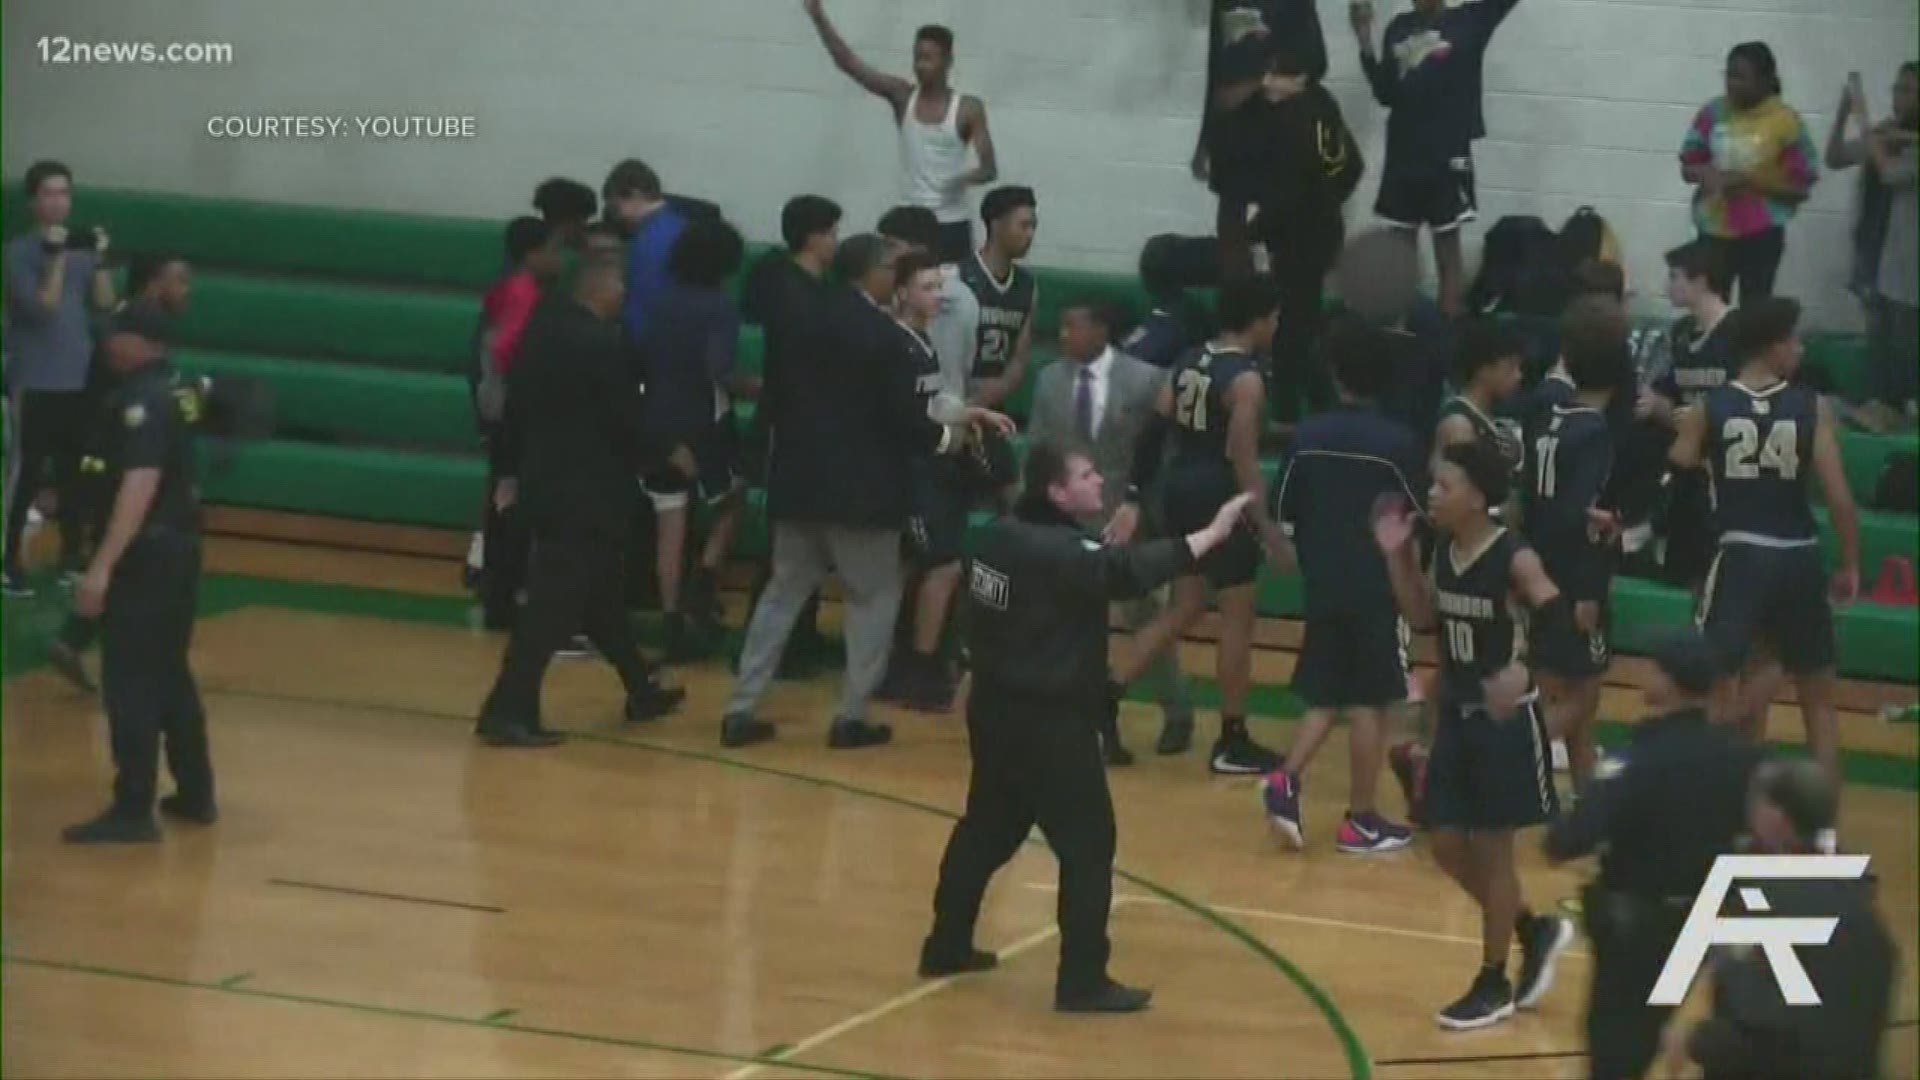 In a video that emerged after the game, Gino Crump  is seen shoving and grabbing a player. The school recommended to the board that Crump be fired.